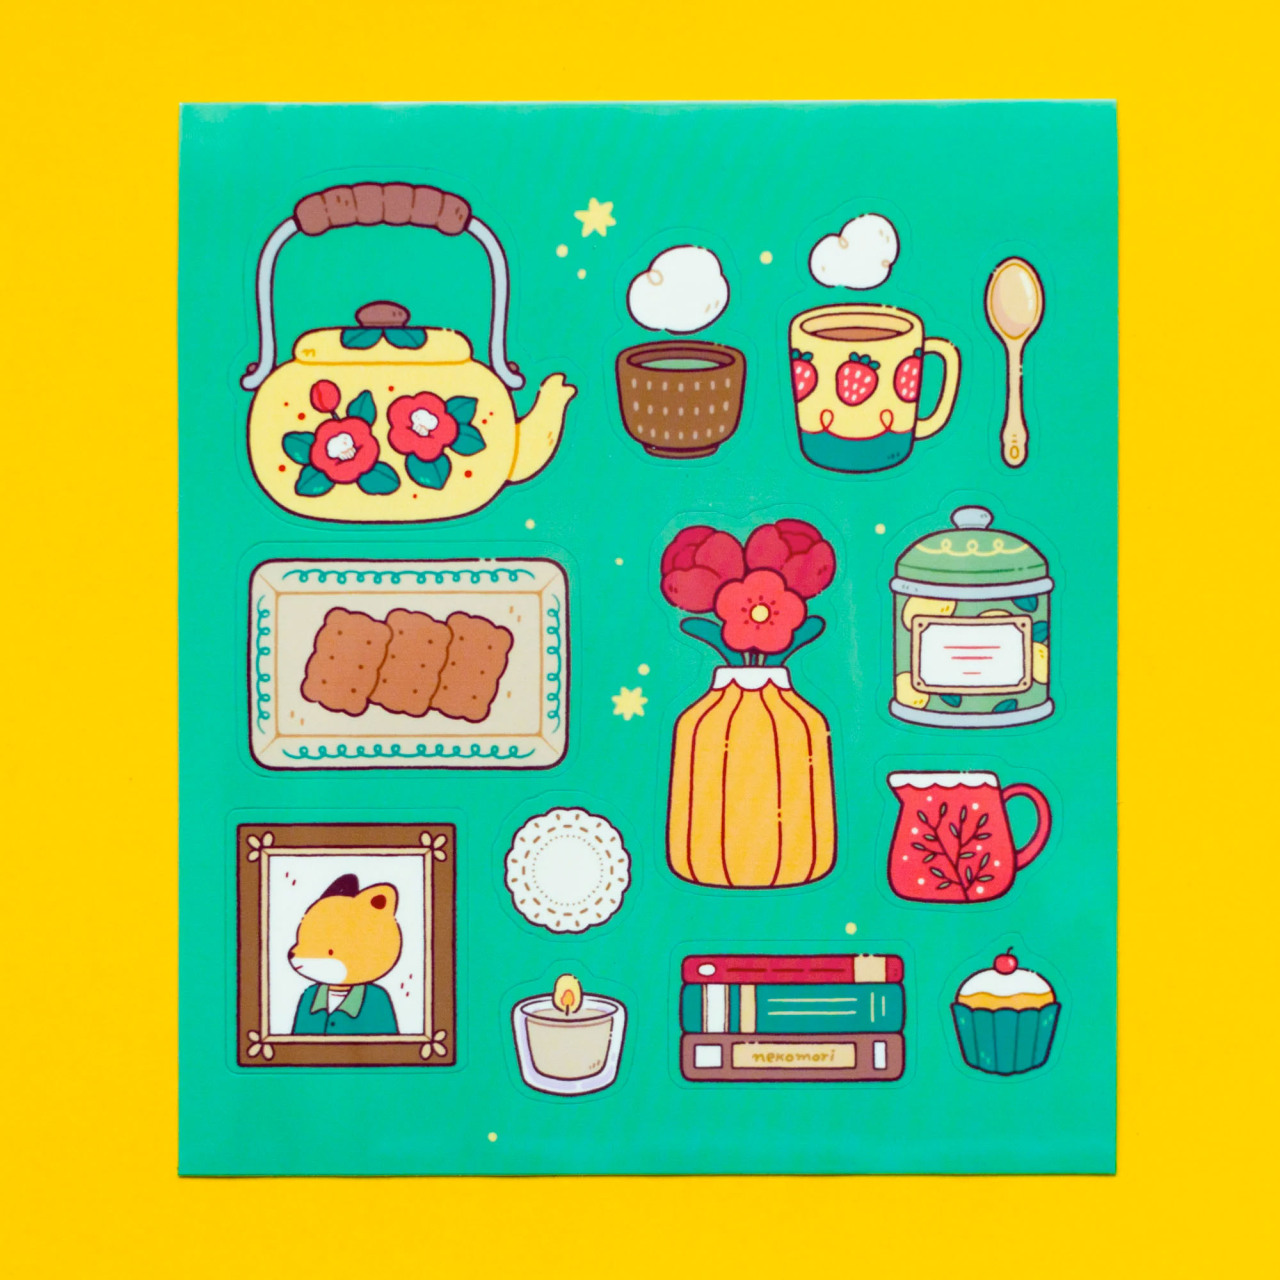 Sticker sheet depicting various items that might be found in a tea party, such as teapots and cups, snacks, and stacks of books.